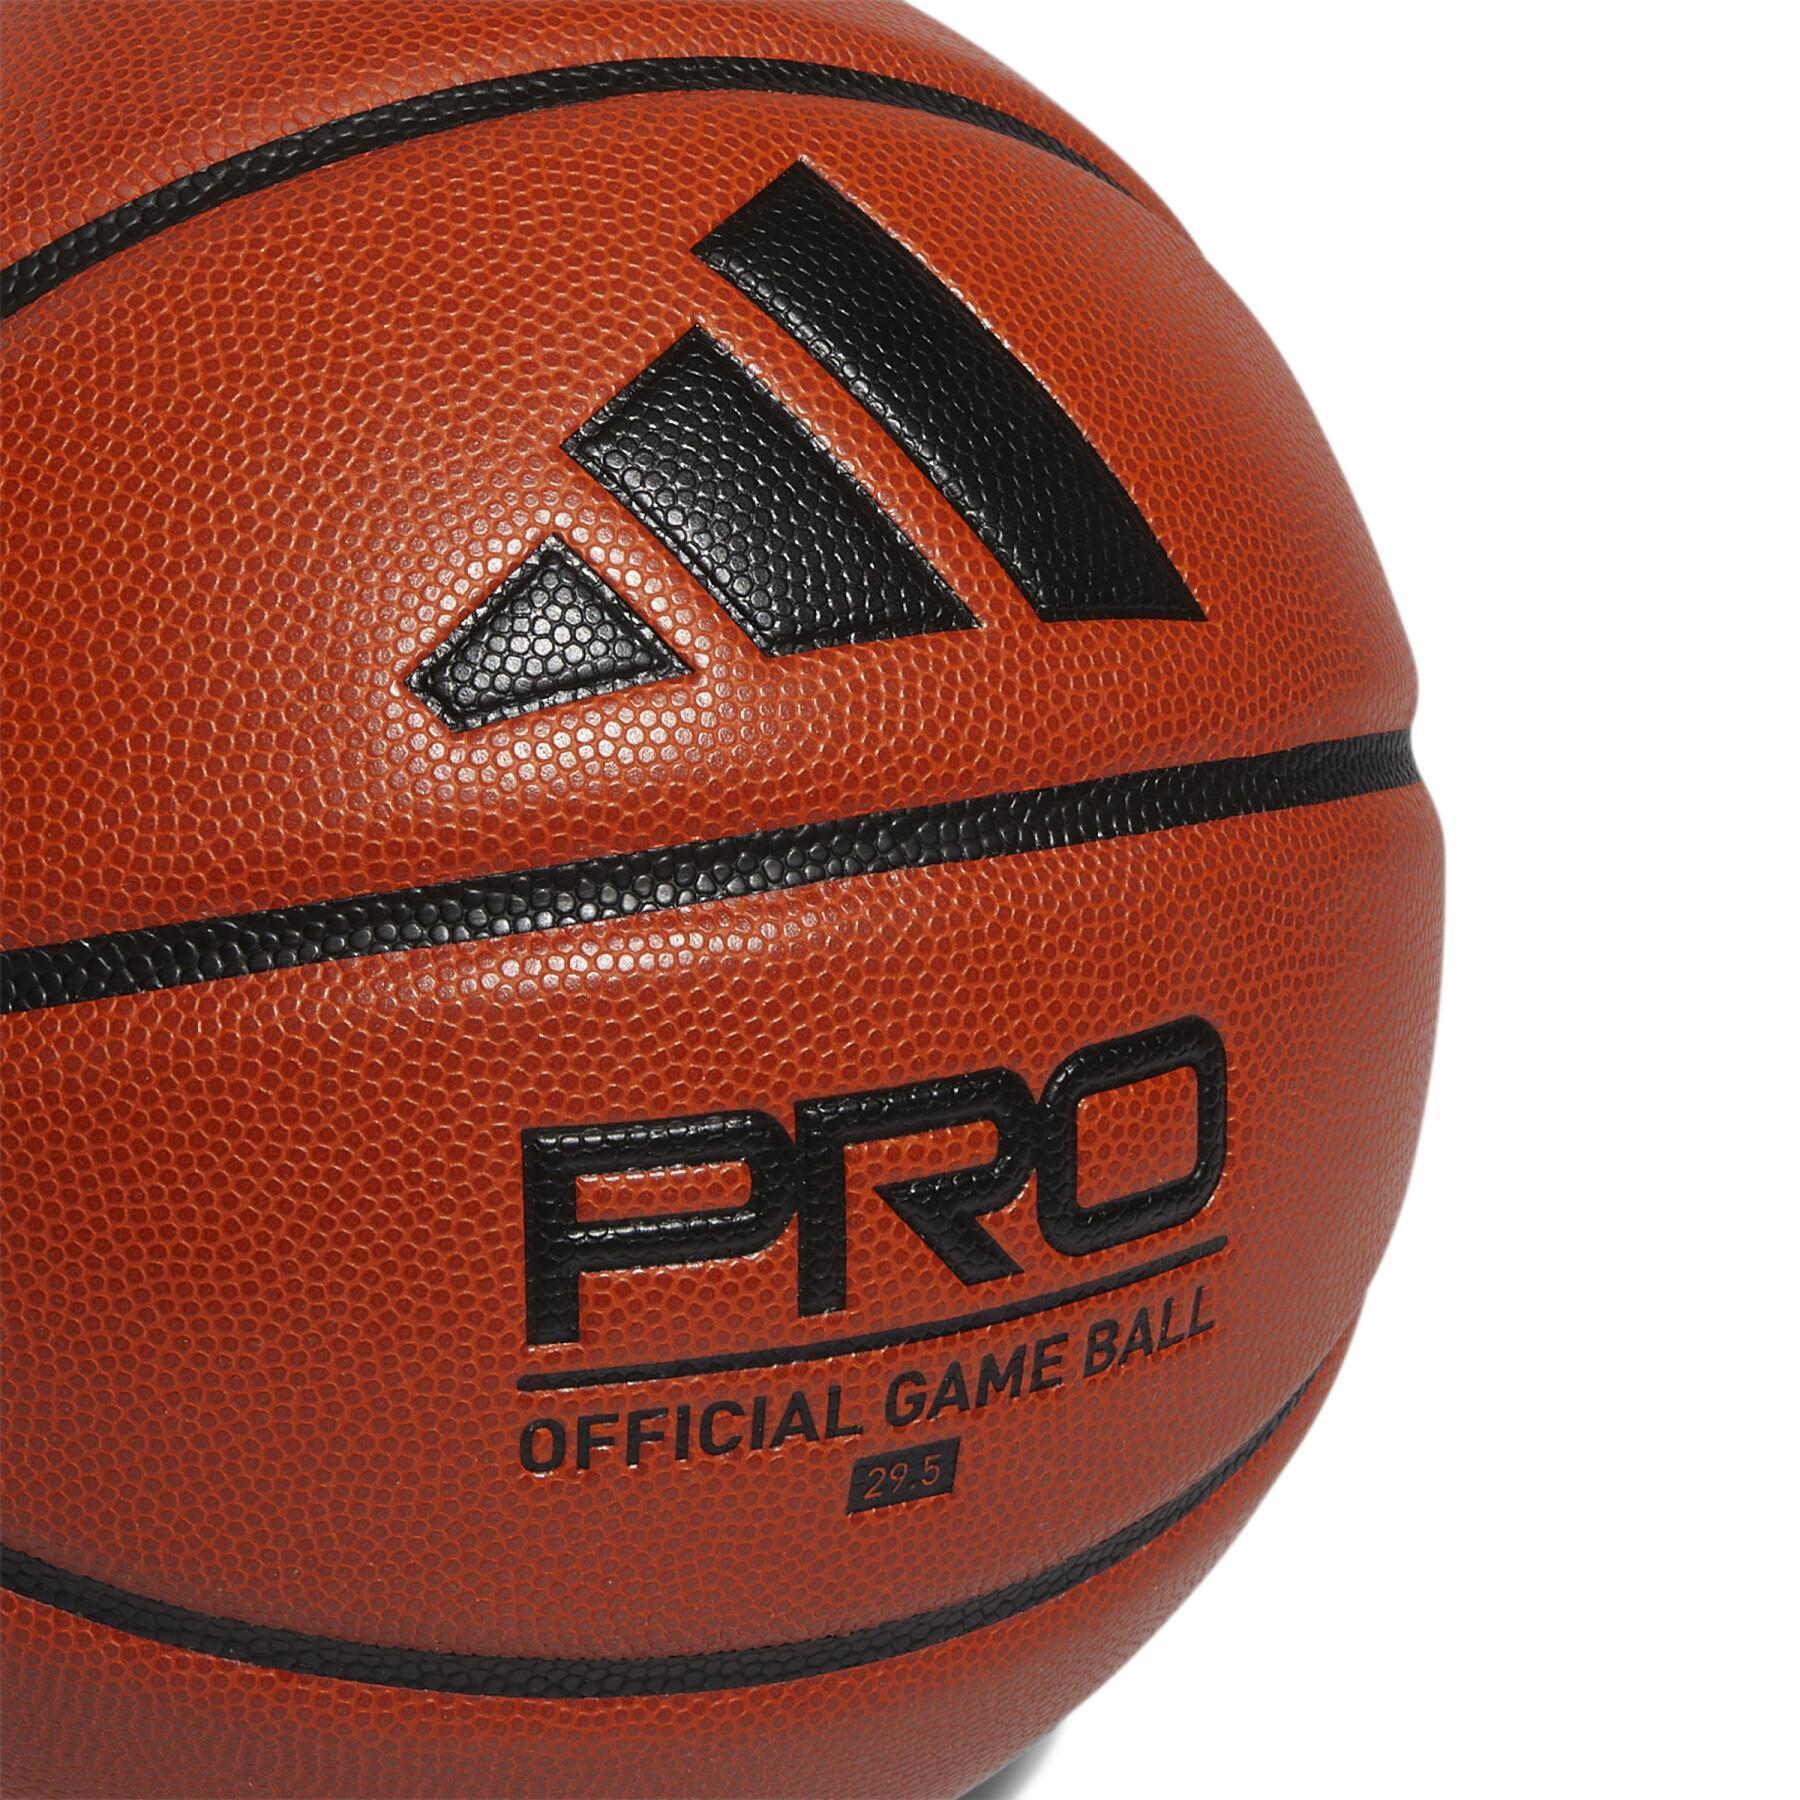 Bola adidas Pro 3.0 Official Game